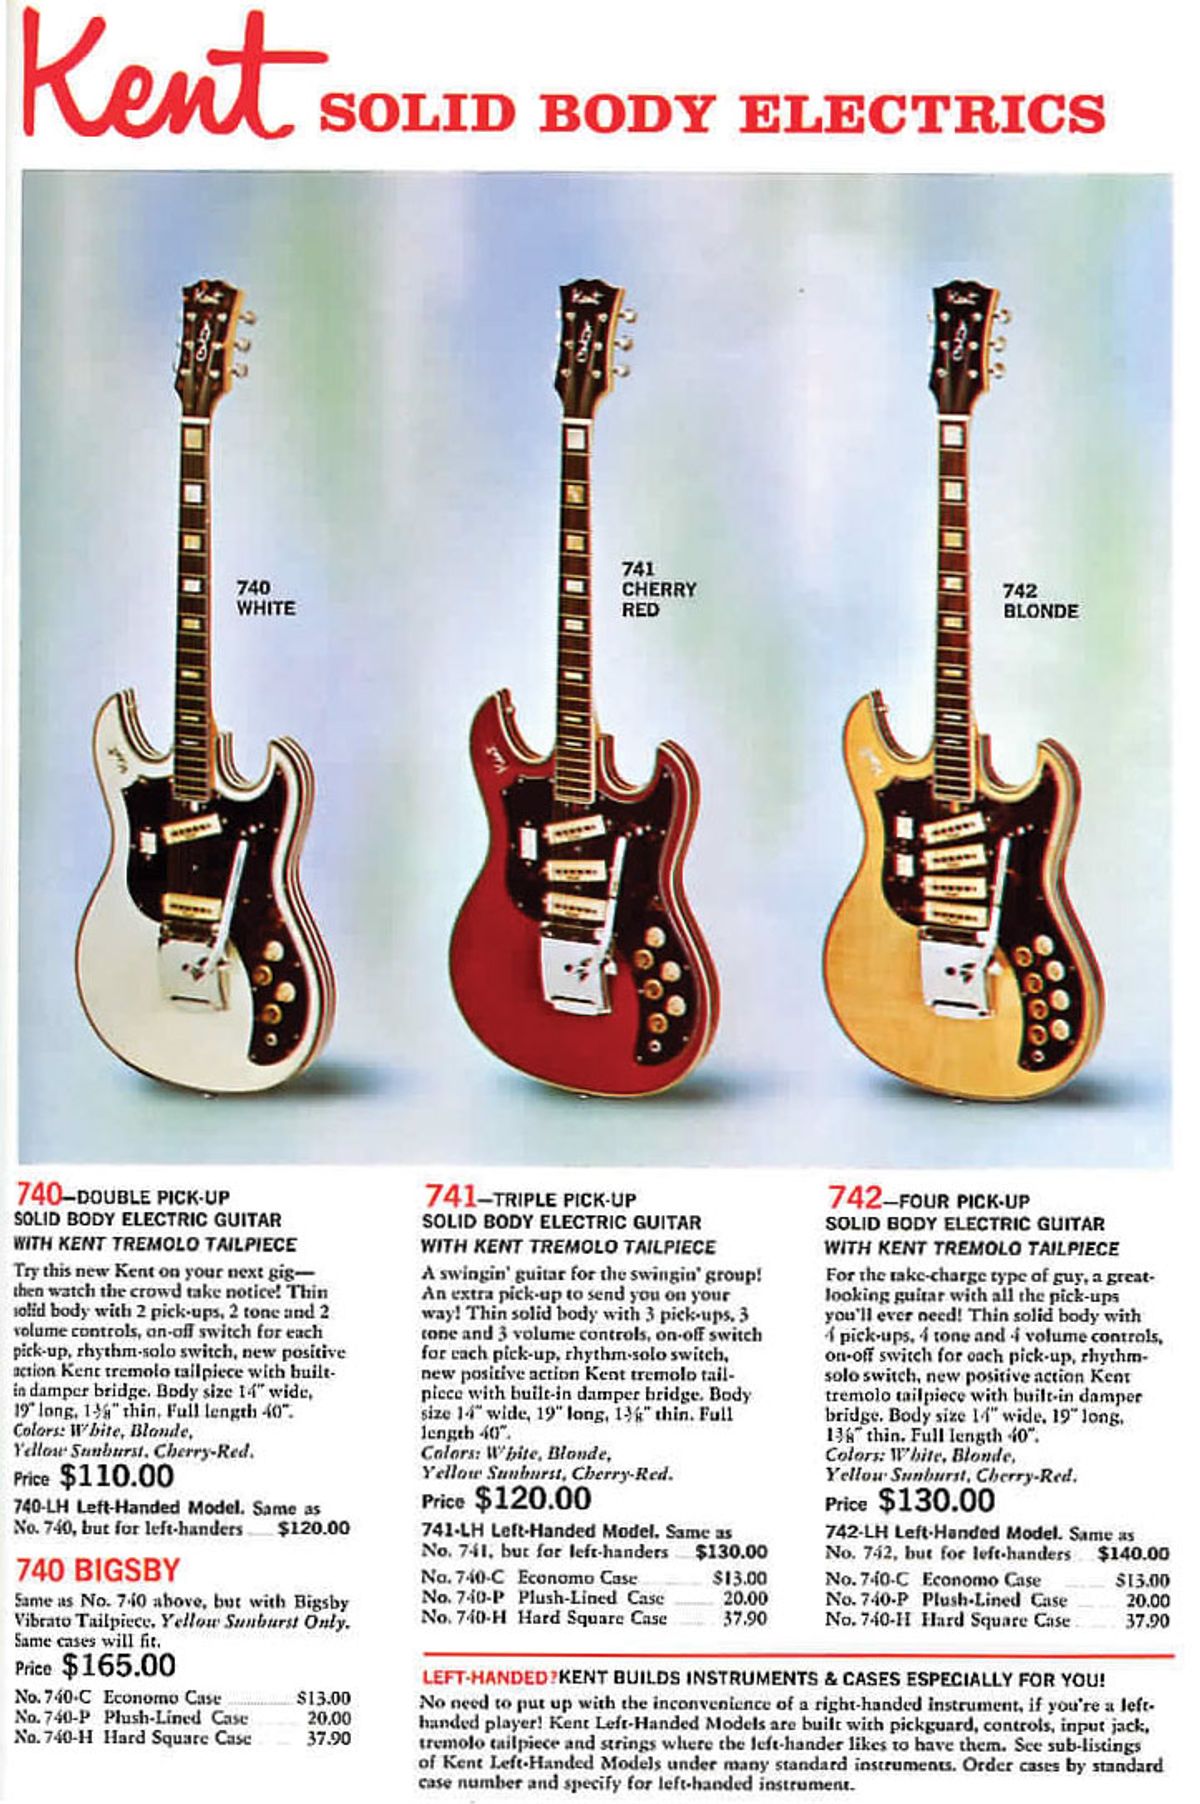 Wizard of Odd: Surf’s Up! The Story Behind Late-’60s 700-Series Kents